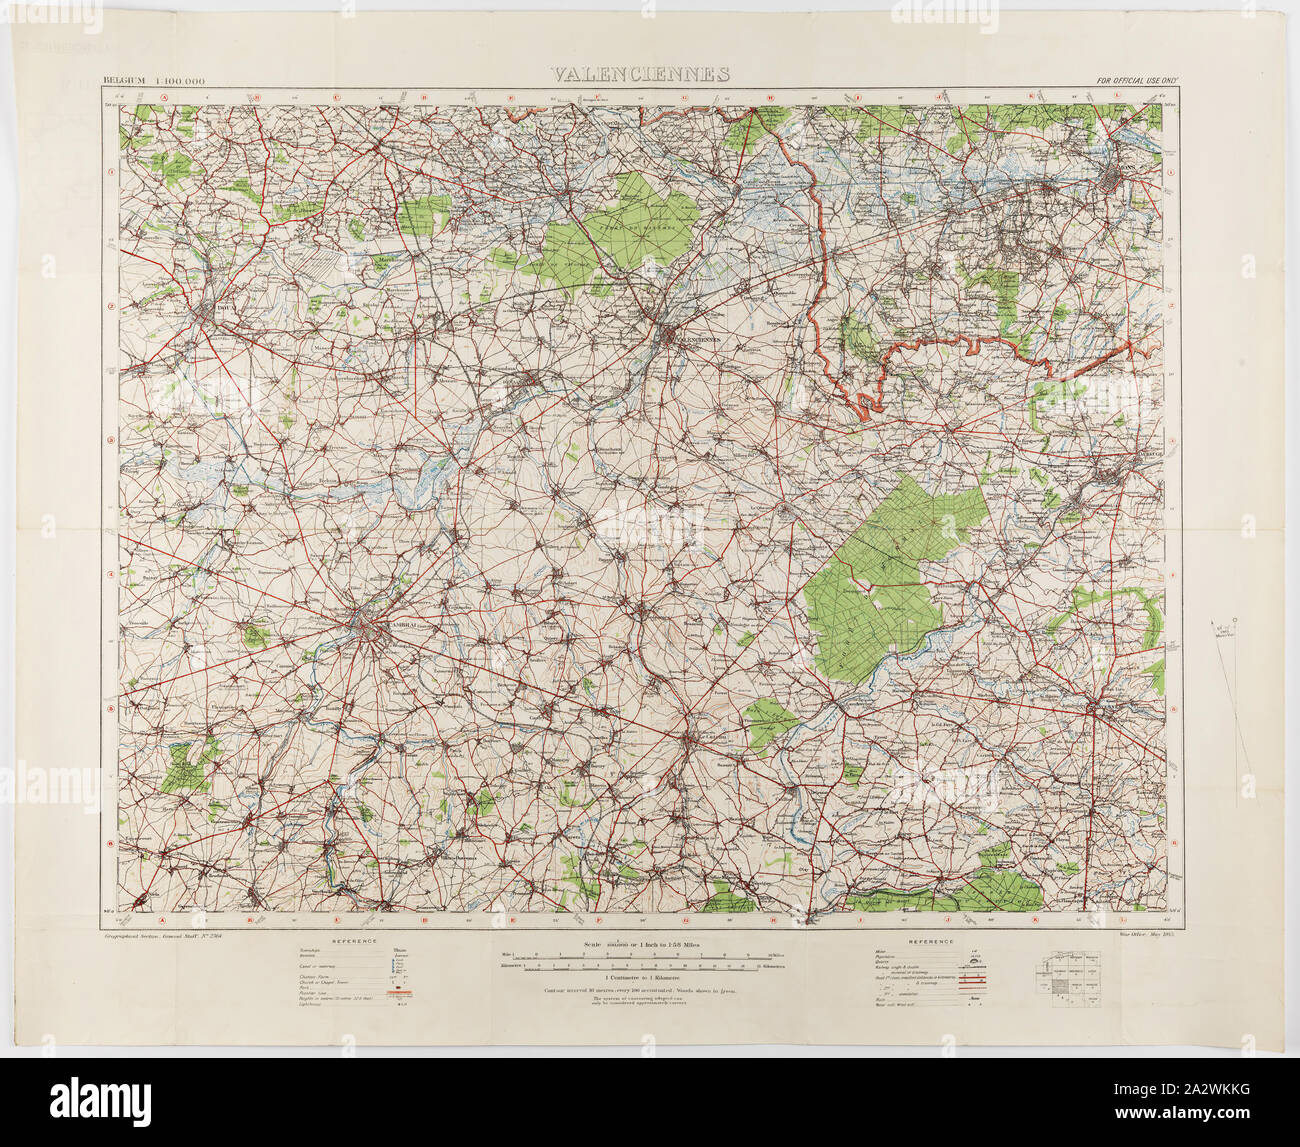 Map - Military, Belgium, Valenciennes 12, Scale 1:100,000, World War I, 1914-1918, Military map of Belgium, Valenciennes 12 region, scale 1:100,000. The map would have been used during World War I. Maps of this scale lacked the detail needed for trench warfare, instead providing an overview of regions for the use of senior commanders. Part of the collection of World War I memorabilia donated by Sergeant John Lord (#6252). John Lord was 19 years old when he enlisted with Stock Photo